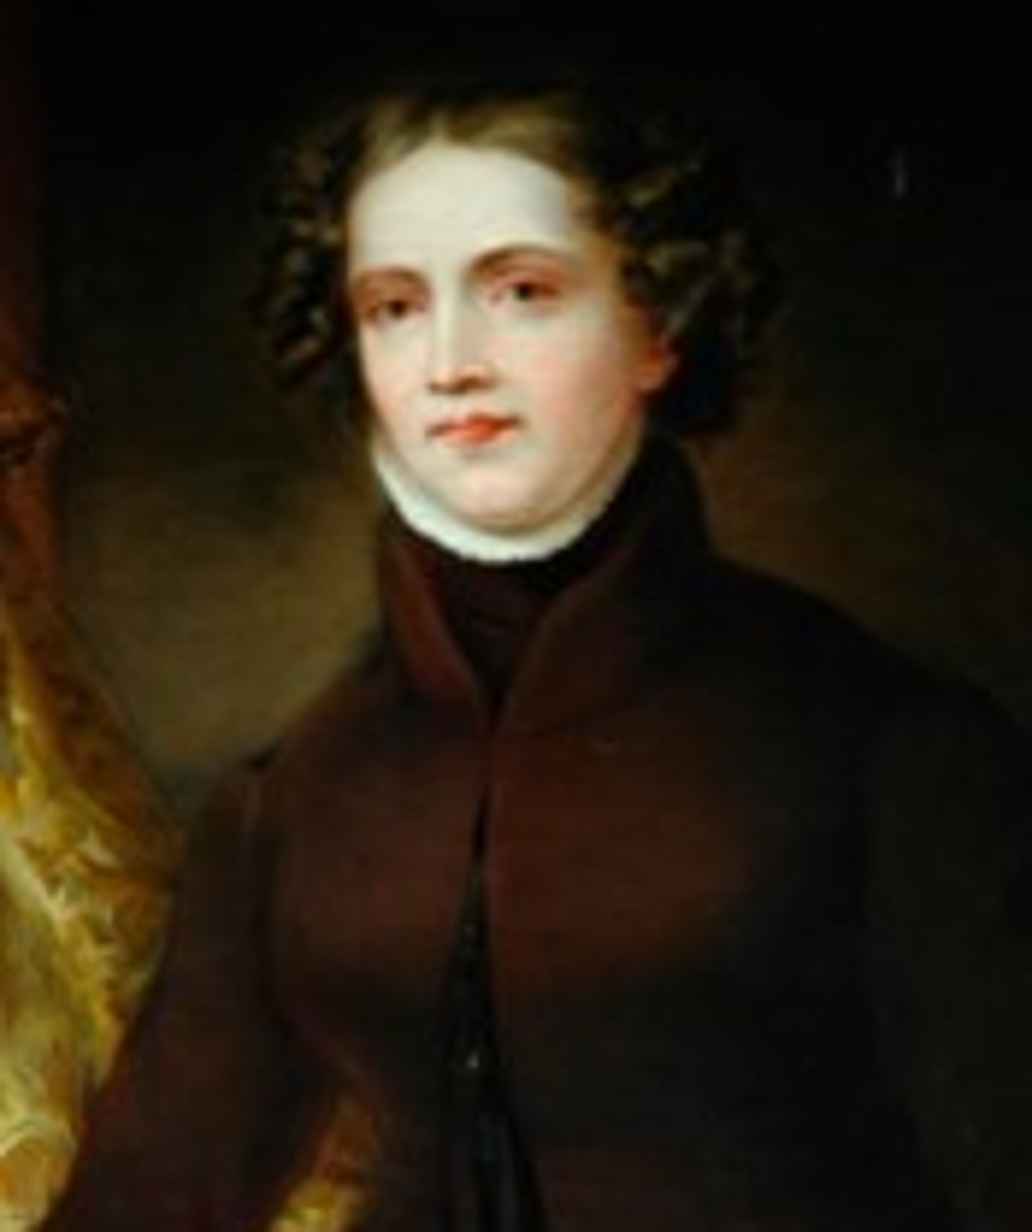 Portrait of Anne Lister who is wearing black, has a high collar and hair in short, tight curls